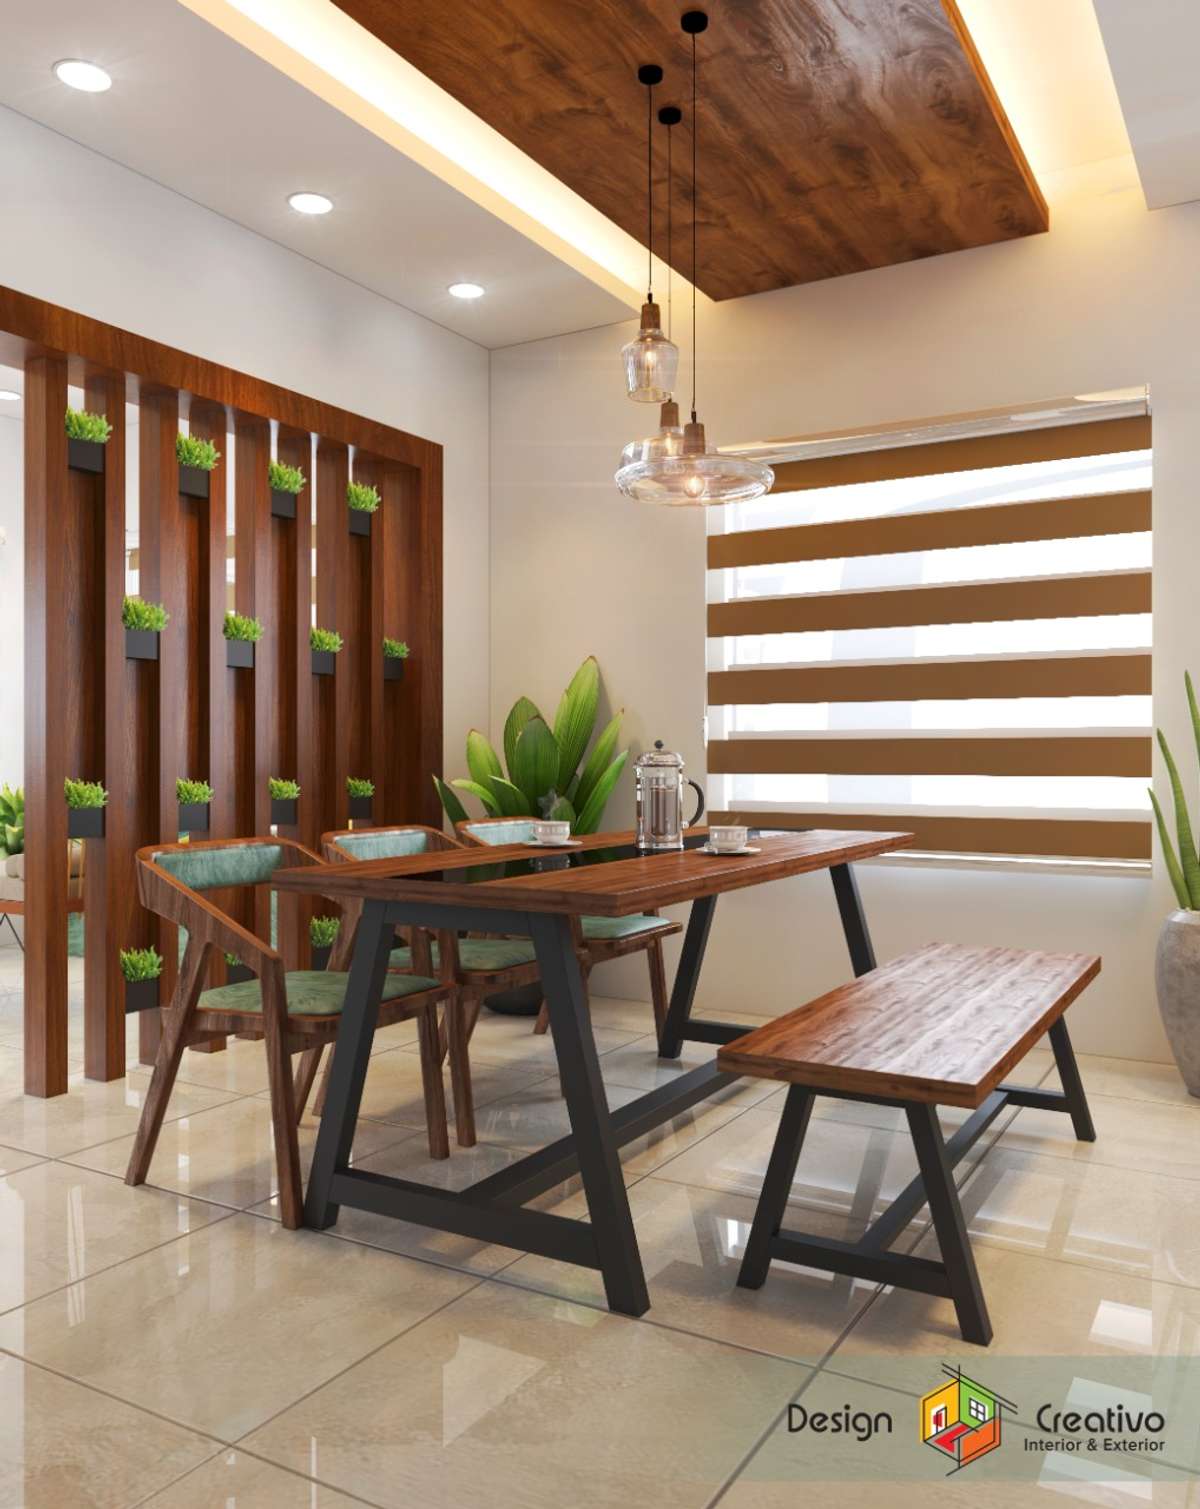 Beautiful dining room in a modern and traditional style 


Designcreativo@North paravoor Ernakulam. . 

 #artechdesign  #homedecor  #homedecoration  #homestyle  #diningarea  #dining  #DiningChairs  #RectangularDiningTable  #DiningTable  #DiningTableAndChairs